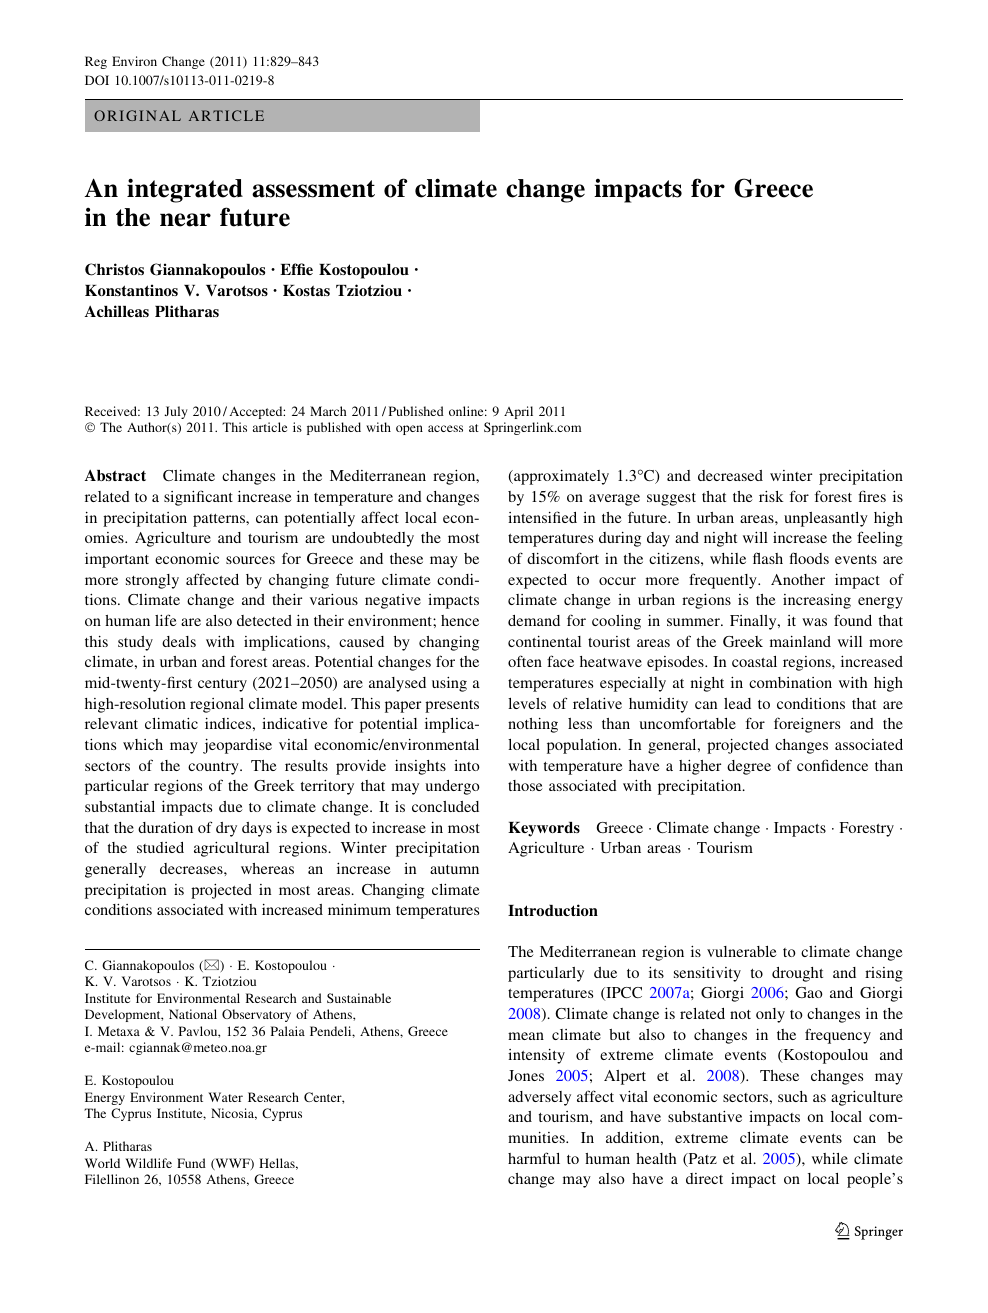 An integrated assessment of climate change impacts for Greece in ...